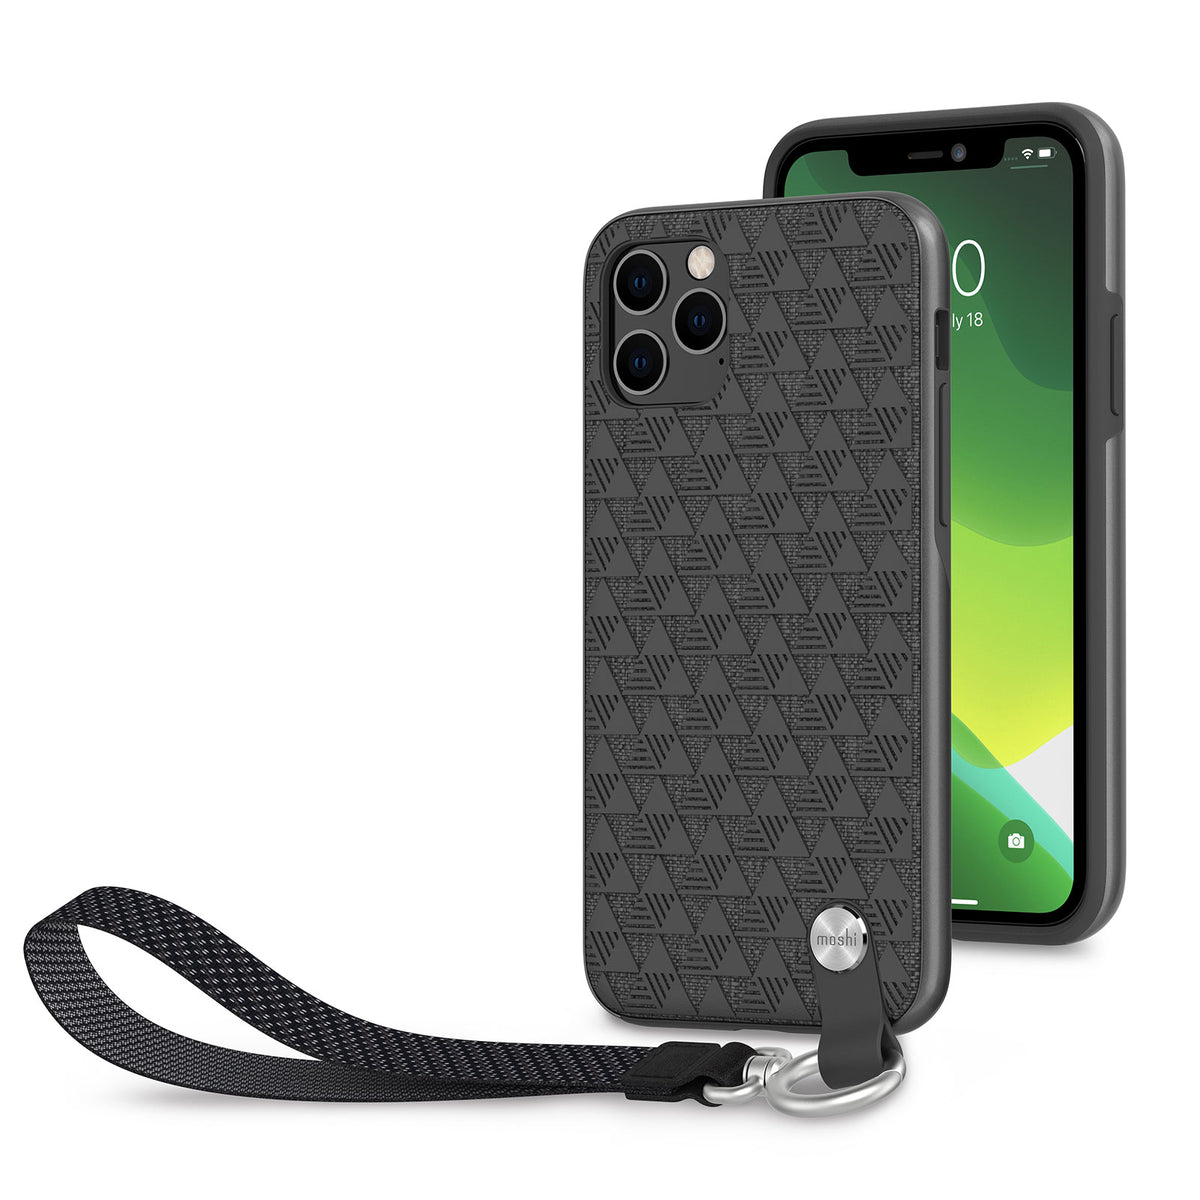 MOSHI Altra Case for iPhone 11 Pro - Black